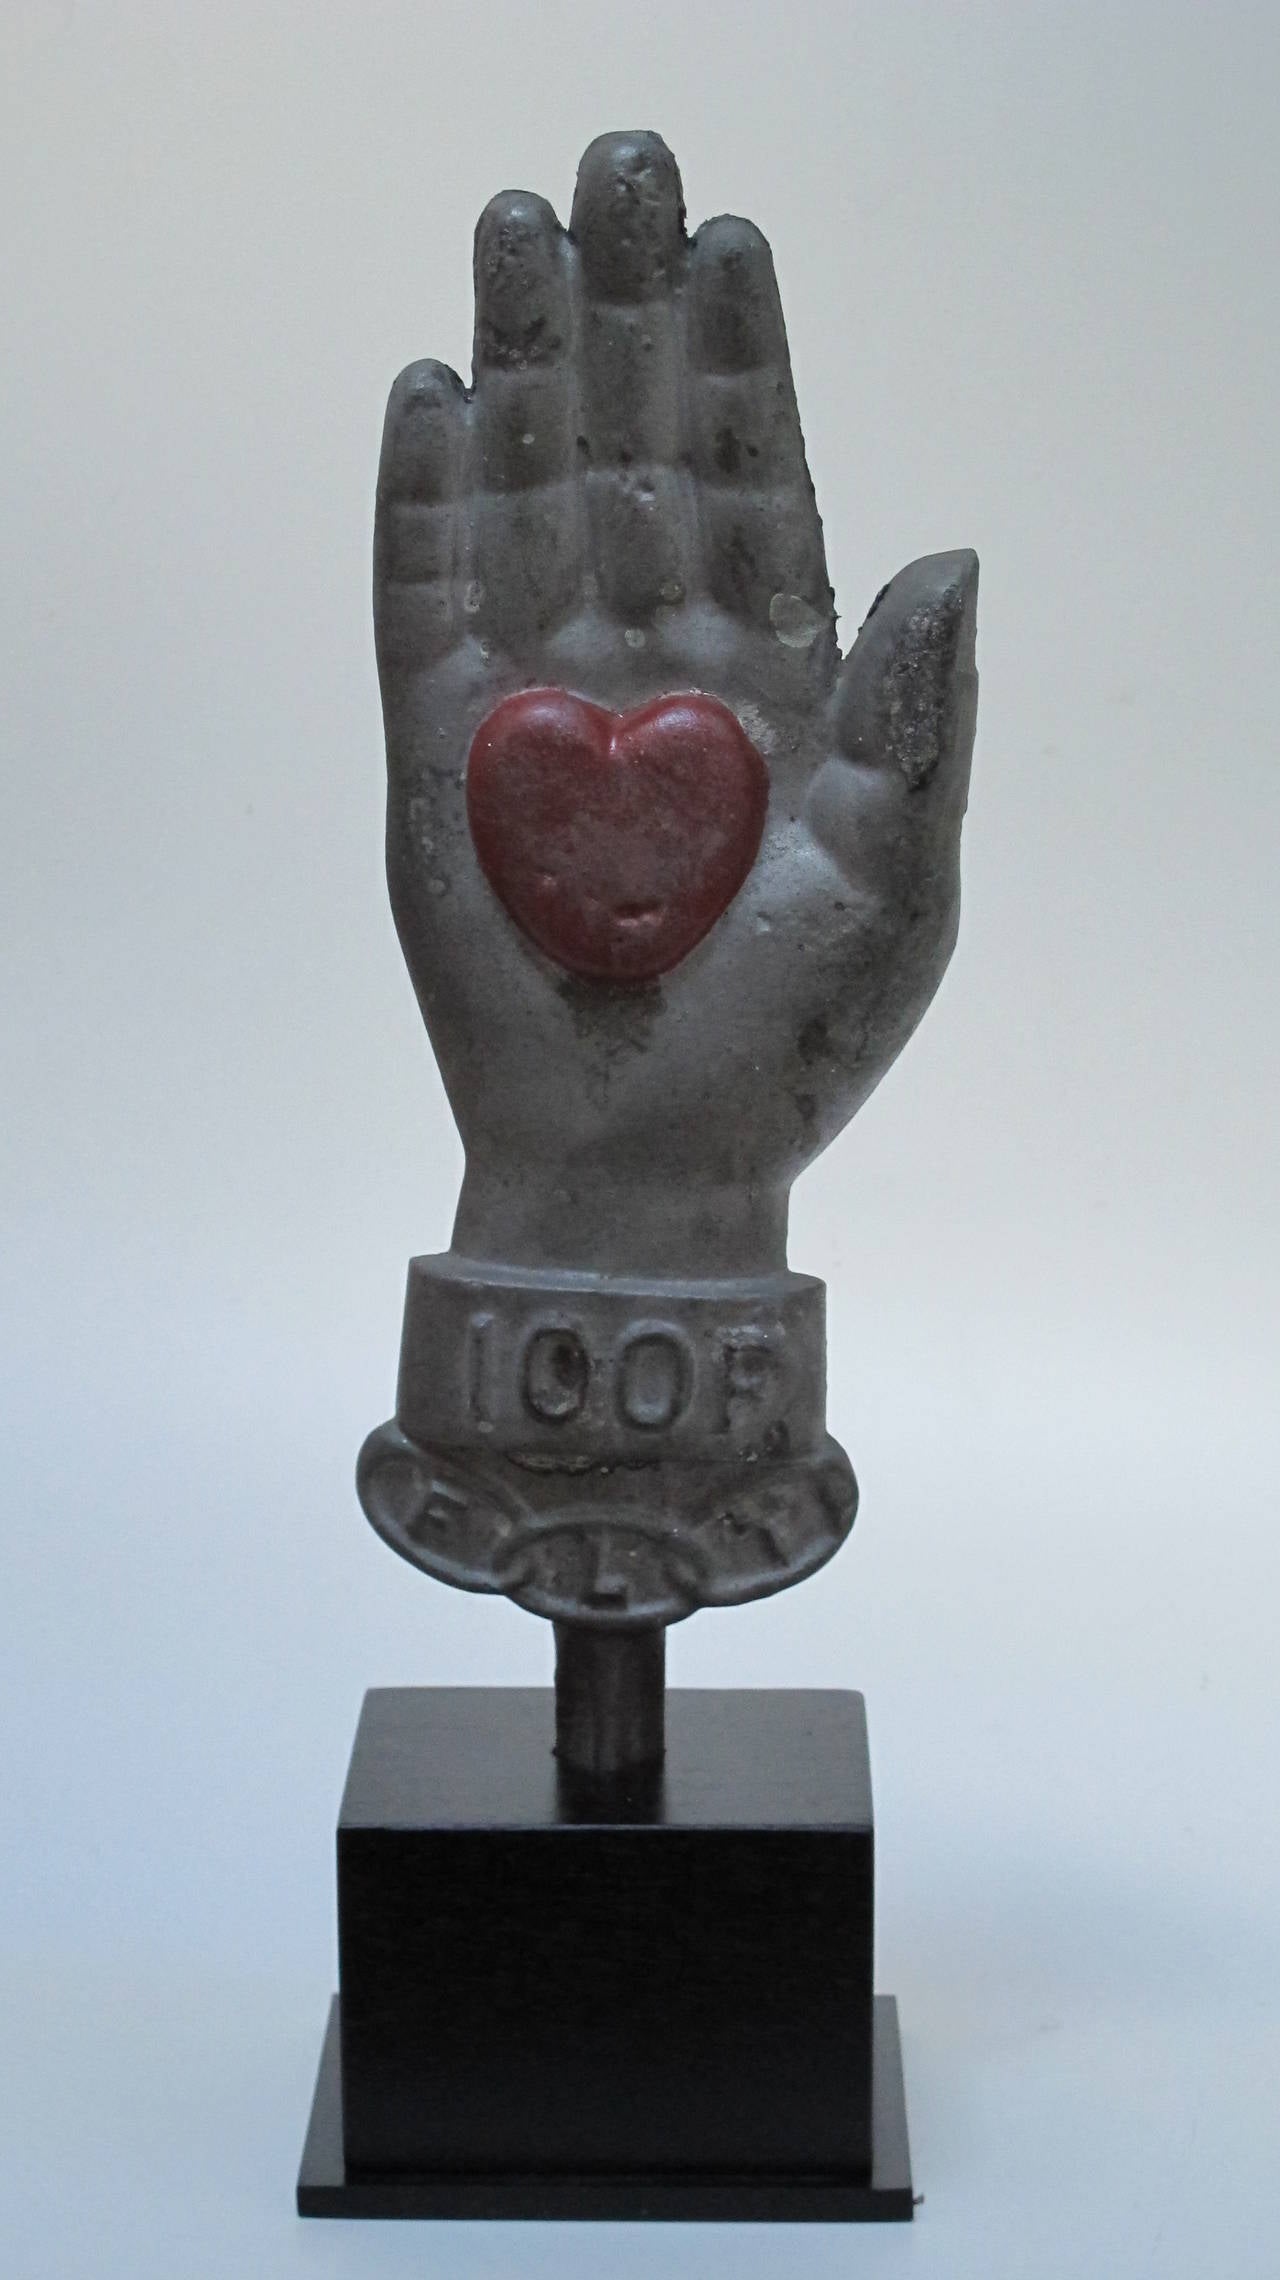 Painted cast iron symbol of Odd Fellows Lodge membership with three linked rings standing for friendship, loyalty, and trust. The heart in hand was a potent symbol for the members of the Lodge and community. The markers were originally made to honor